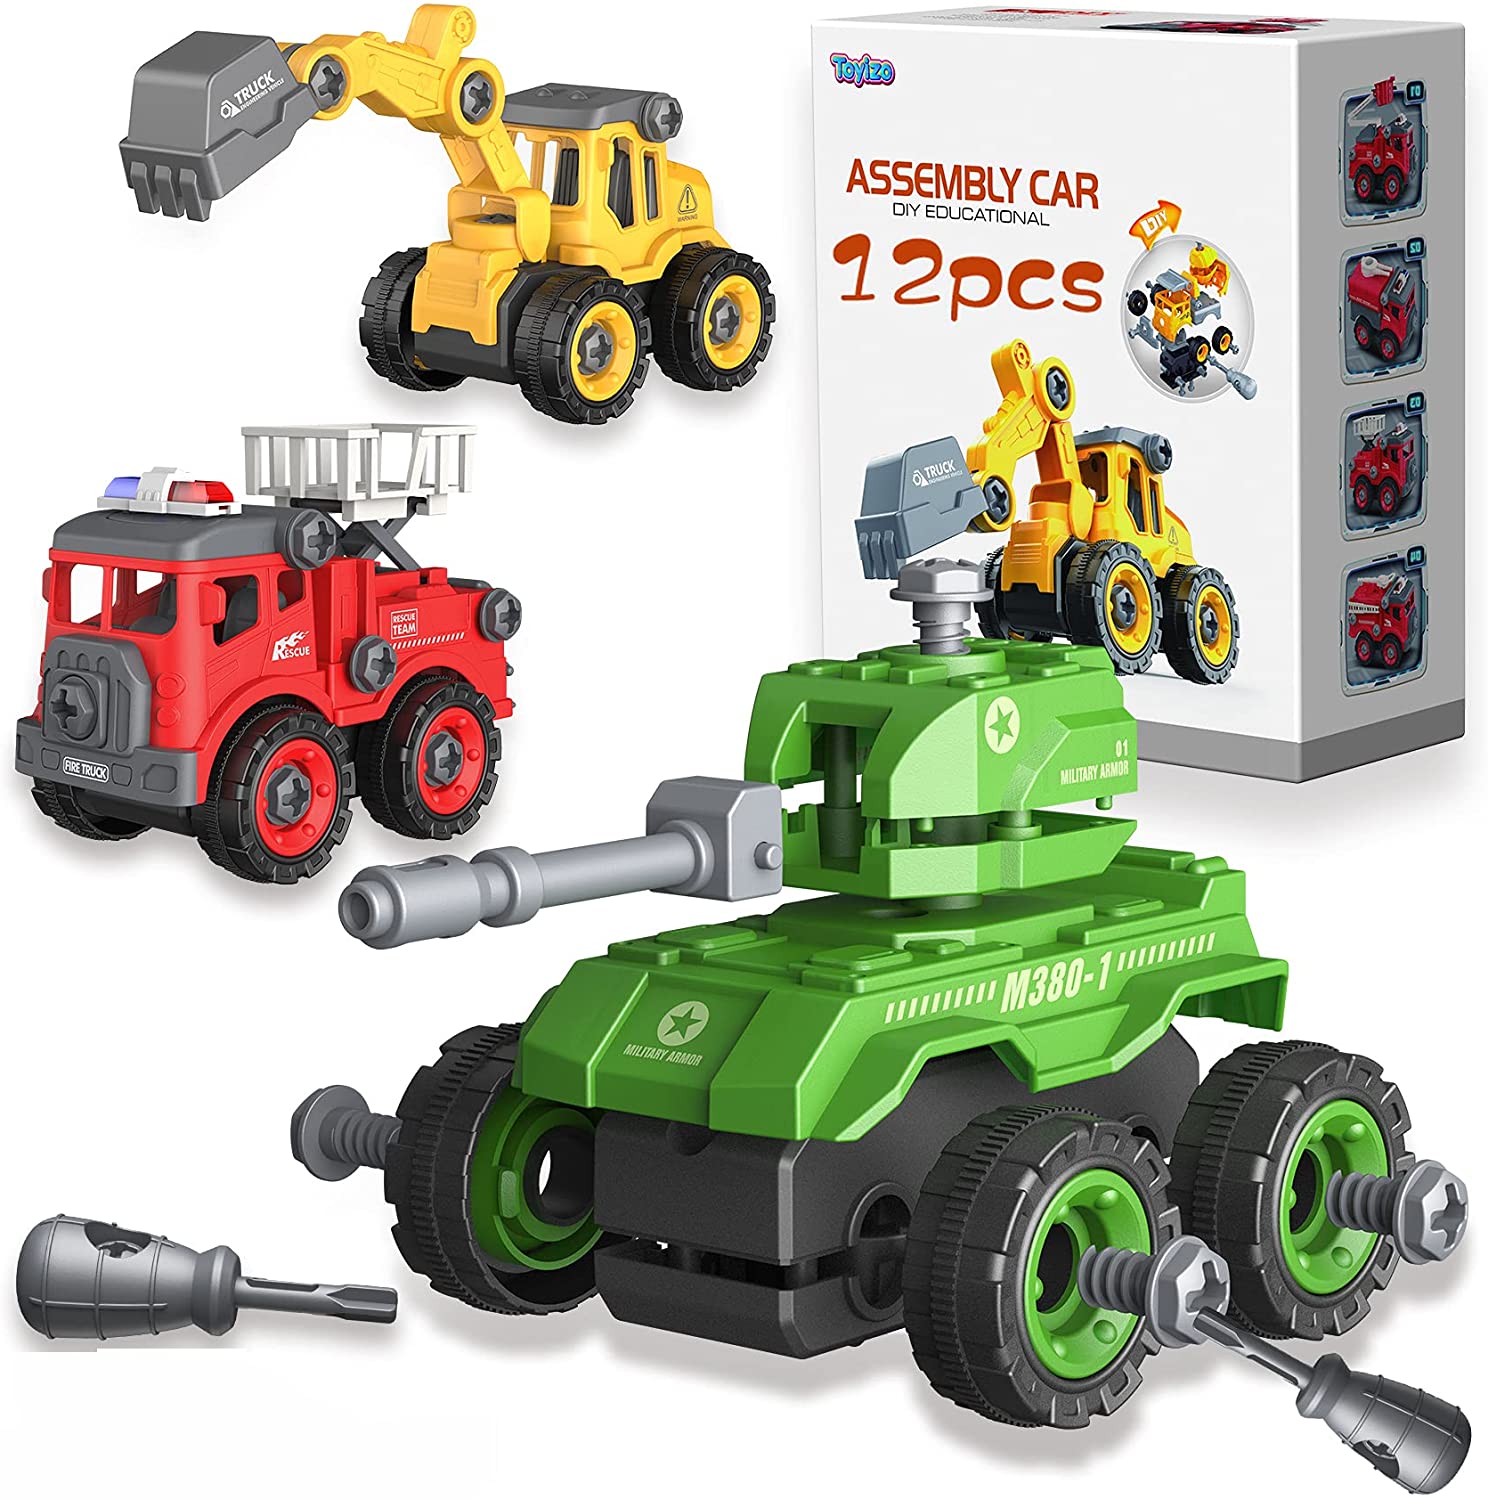  12Pack Truck Toys for 3 4 5 6 7 Year Old Boys, Take Apart Toys Construction Trucks, Kids STEM Construction Building Vehicle Playset W/ Screwdriver, Excavator Toy Cars Christmas Birthday Gifts Boys and Girls